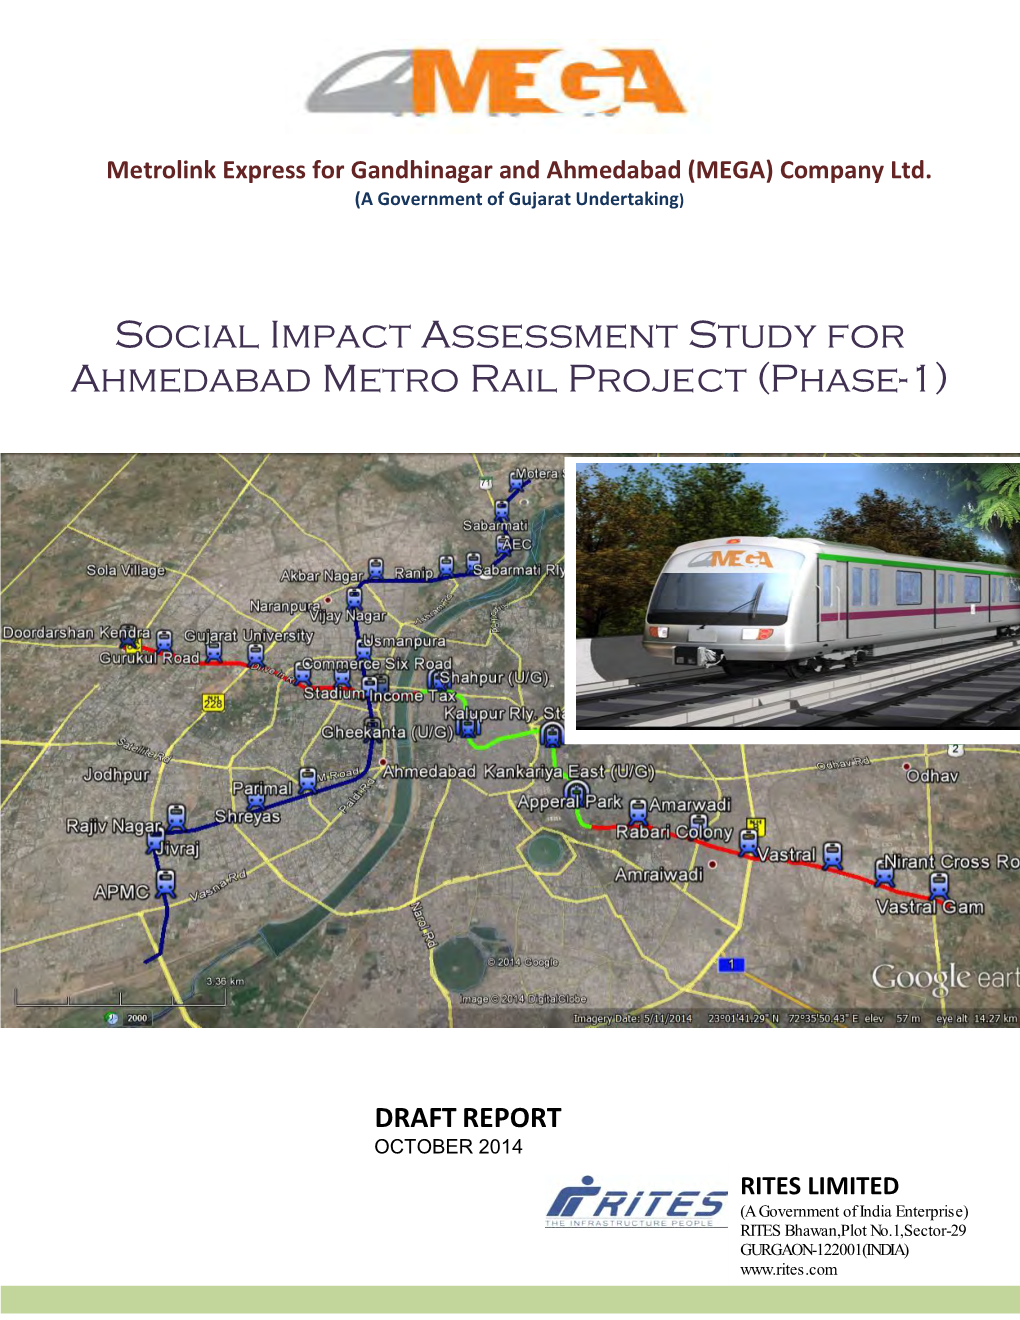 Social Impact Assessment Study for Ahmedabad Metro Rail Project (Phase-1)